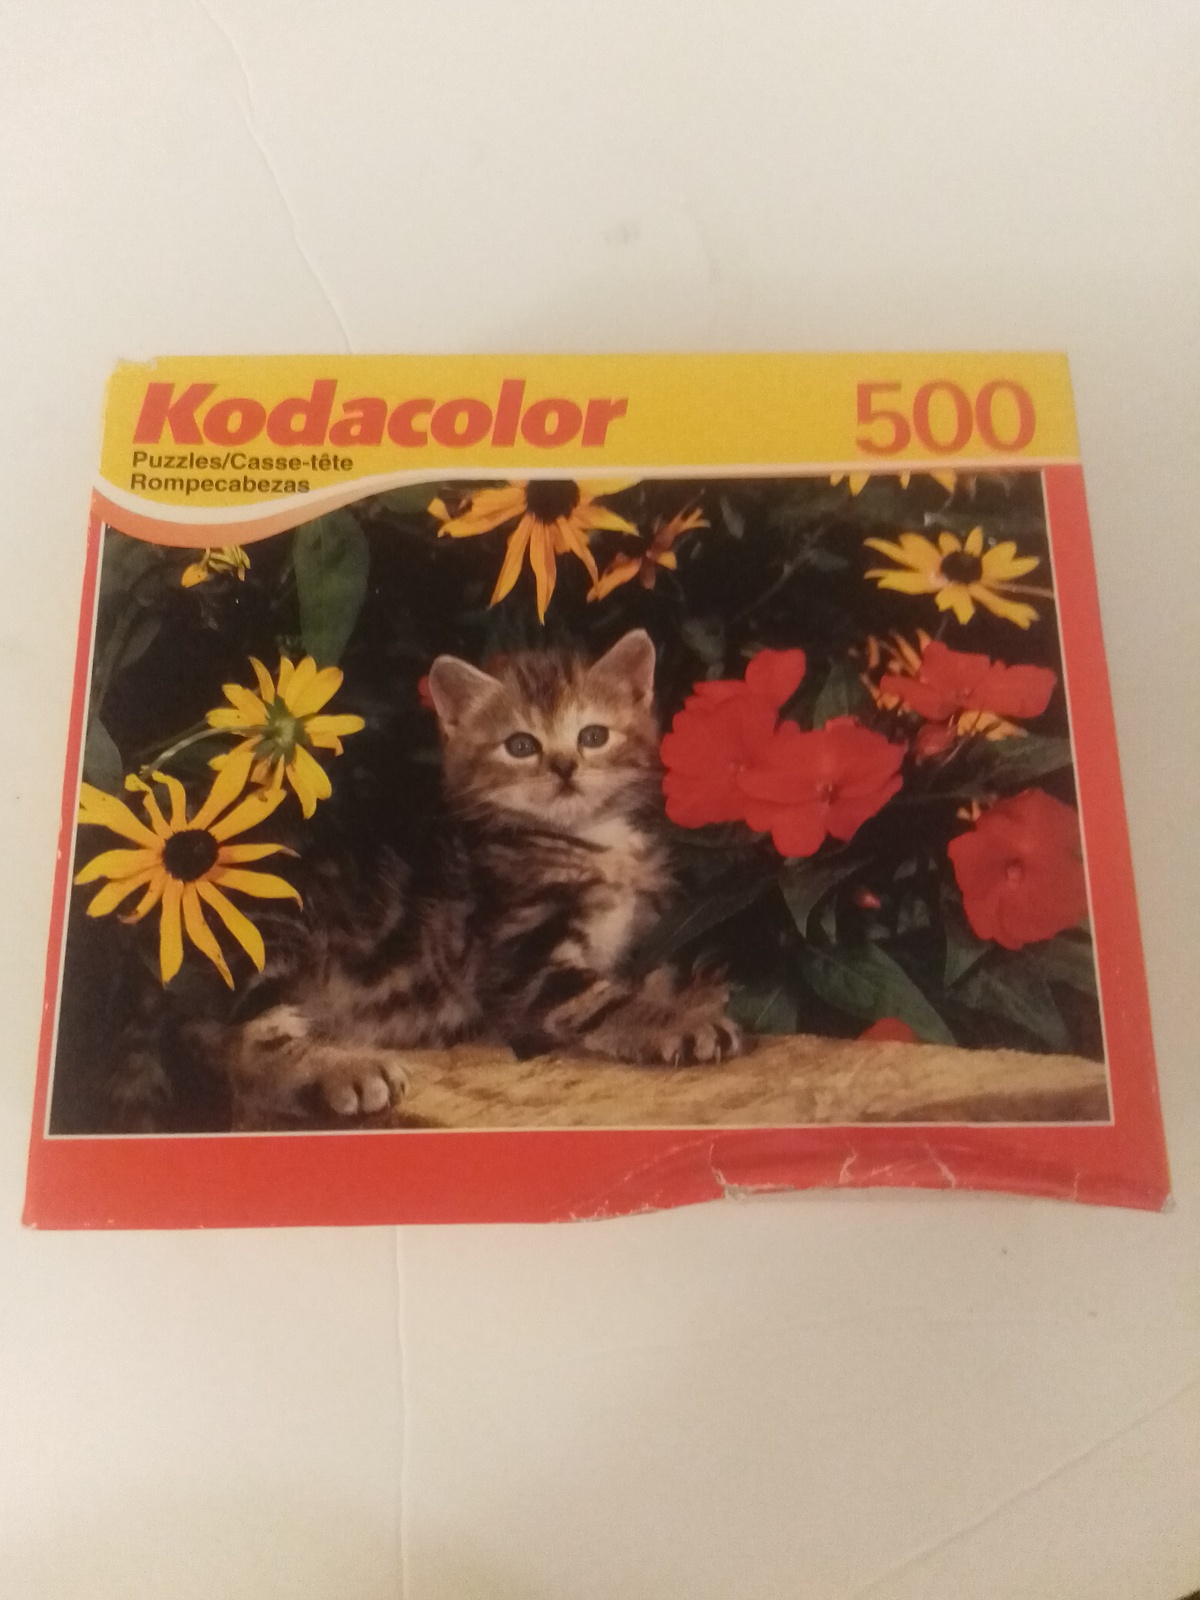 Kodacolor RoseArt Posey Prowler 500 Piece Puzzle 13" X 19" Brand New  - $29.99